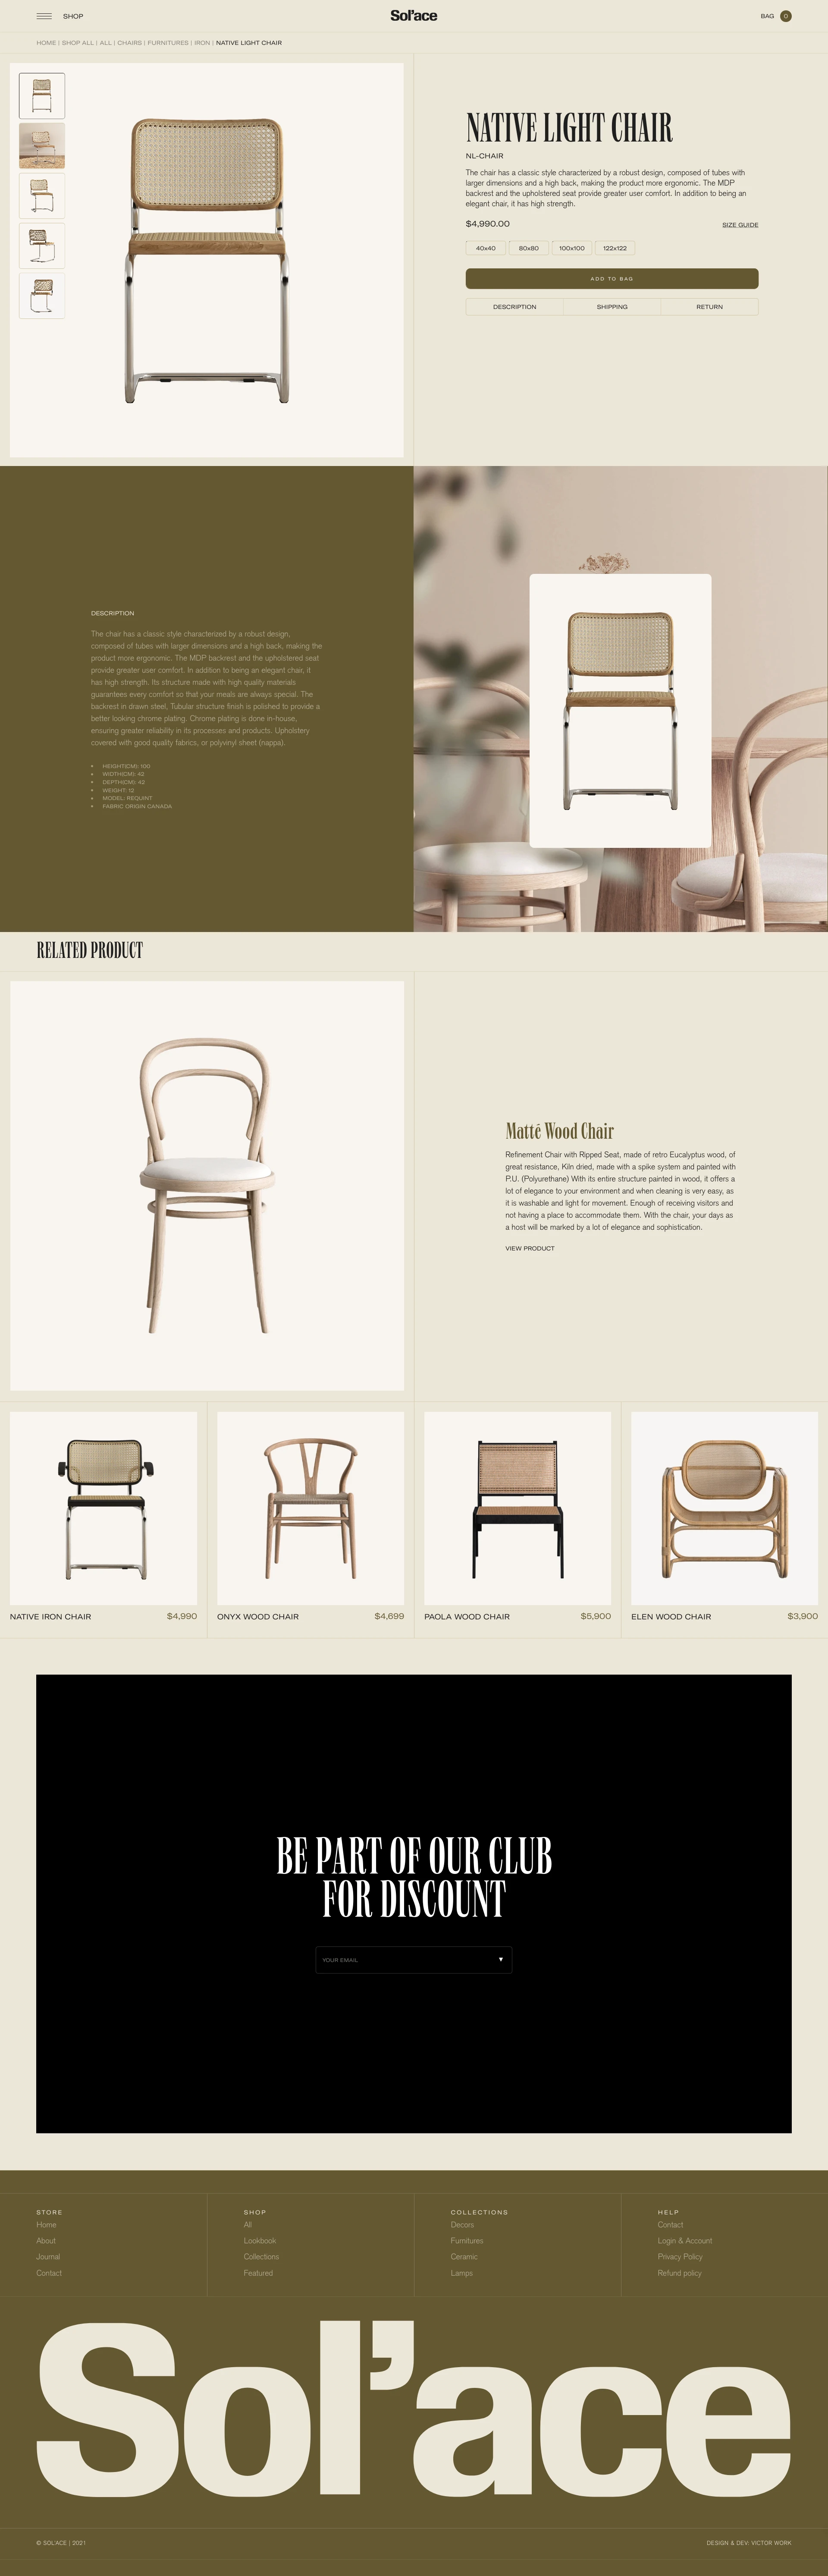 Sol’ace Landing Page Example: Developed the concept of exclusivity, a Sol’ace features timeless furniture, with natural fabrics, curved lines, plenty of mirrors and classic design, which can be incorporated into any decor project.